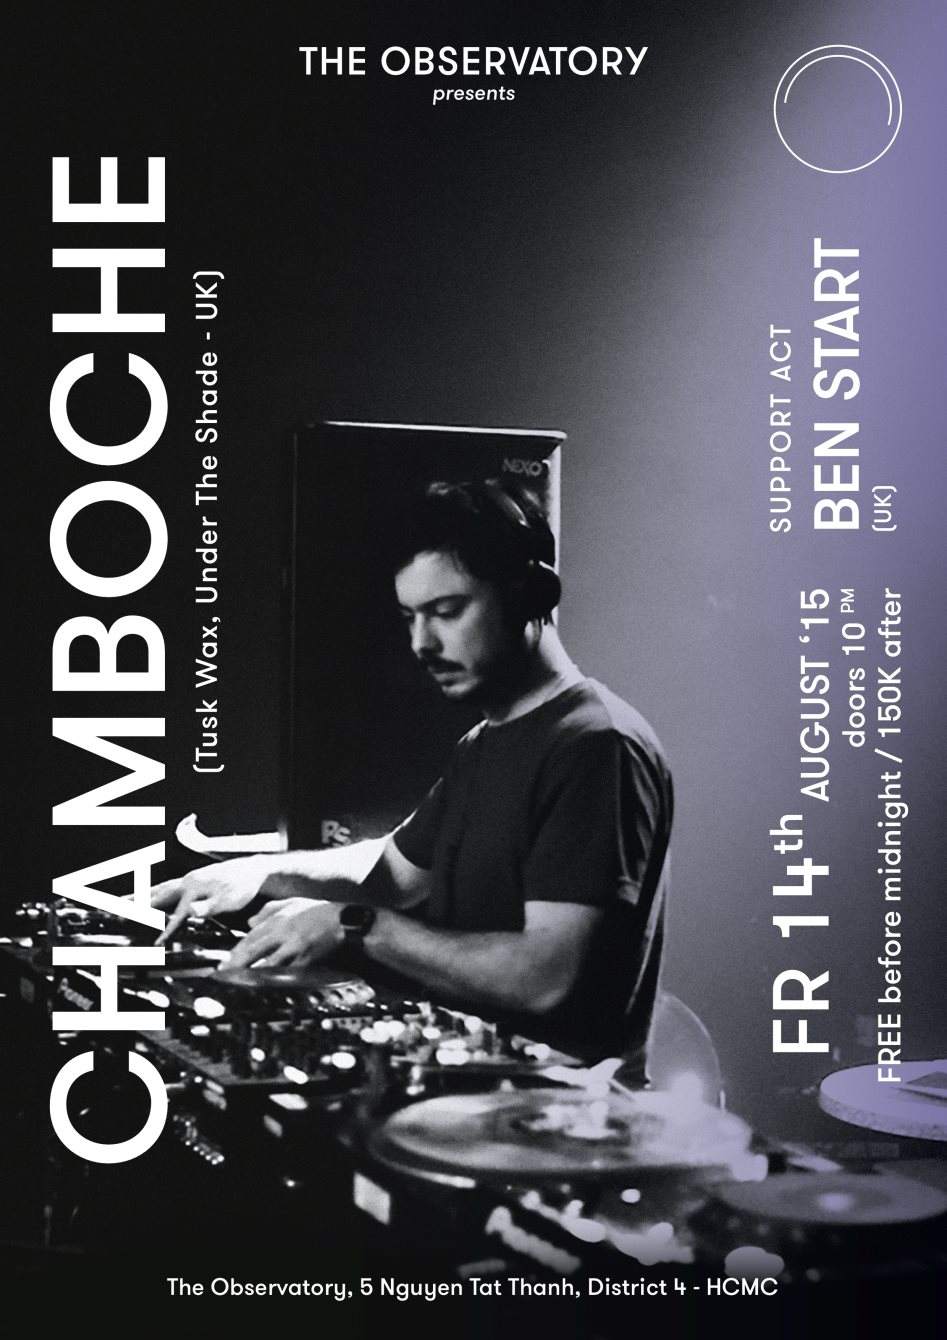 The Observatory presents Chamboche Supported by BEN Start - フライヤー表